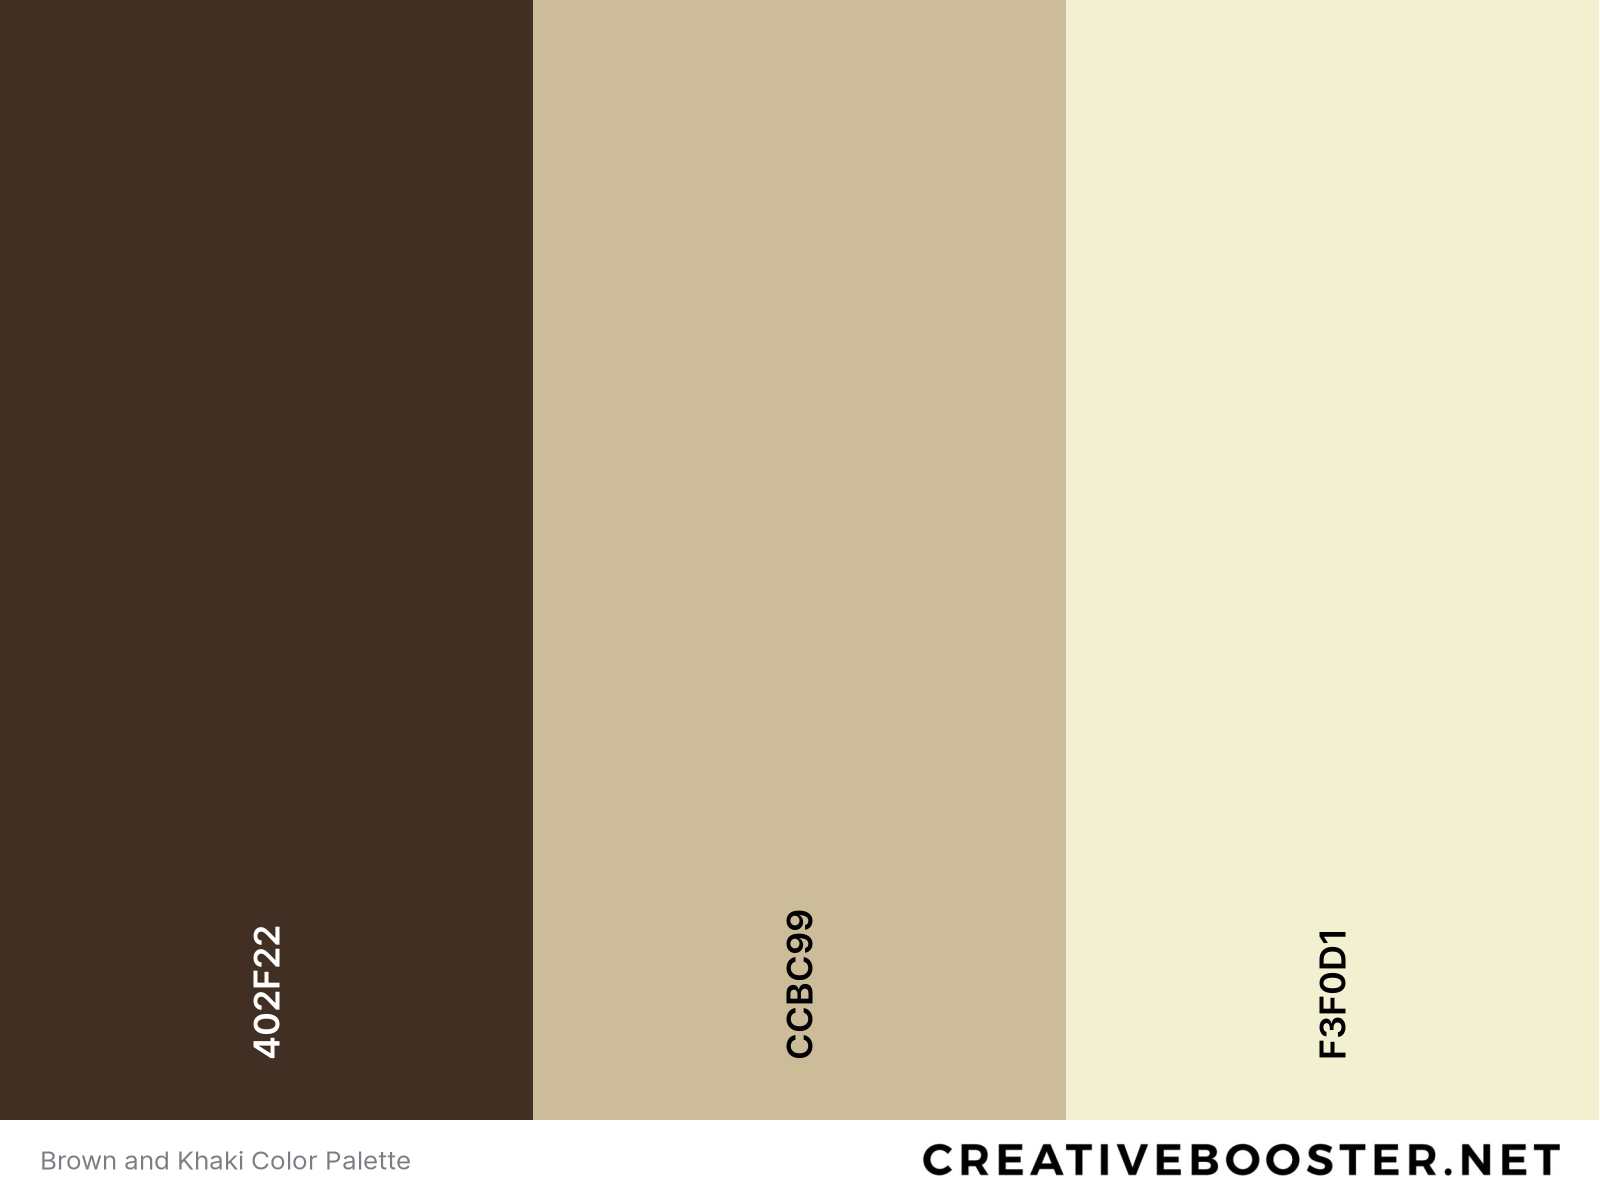 Brown and Khaki Color Palette